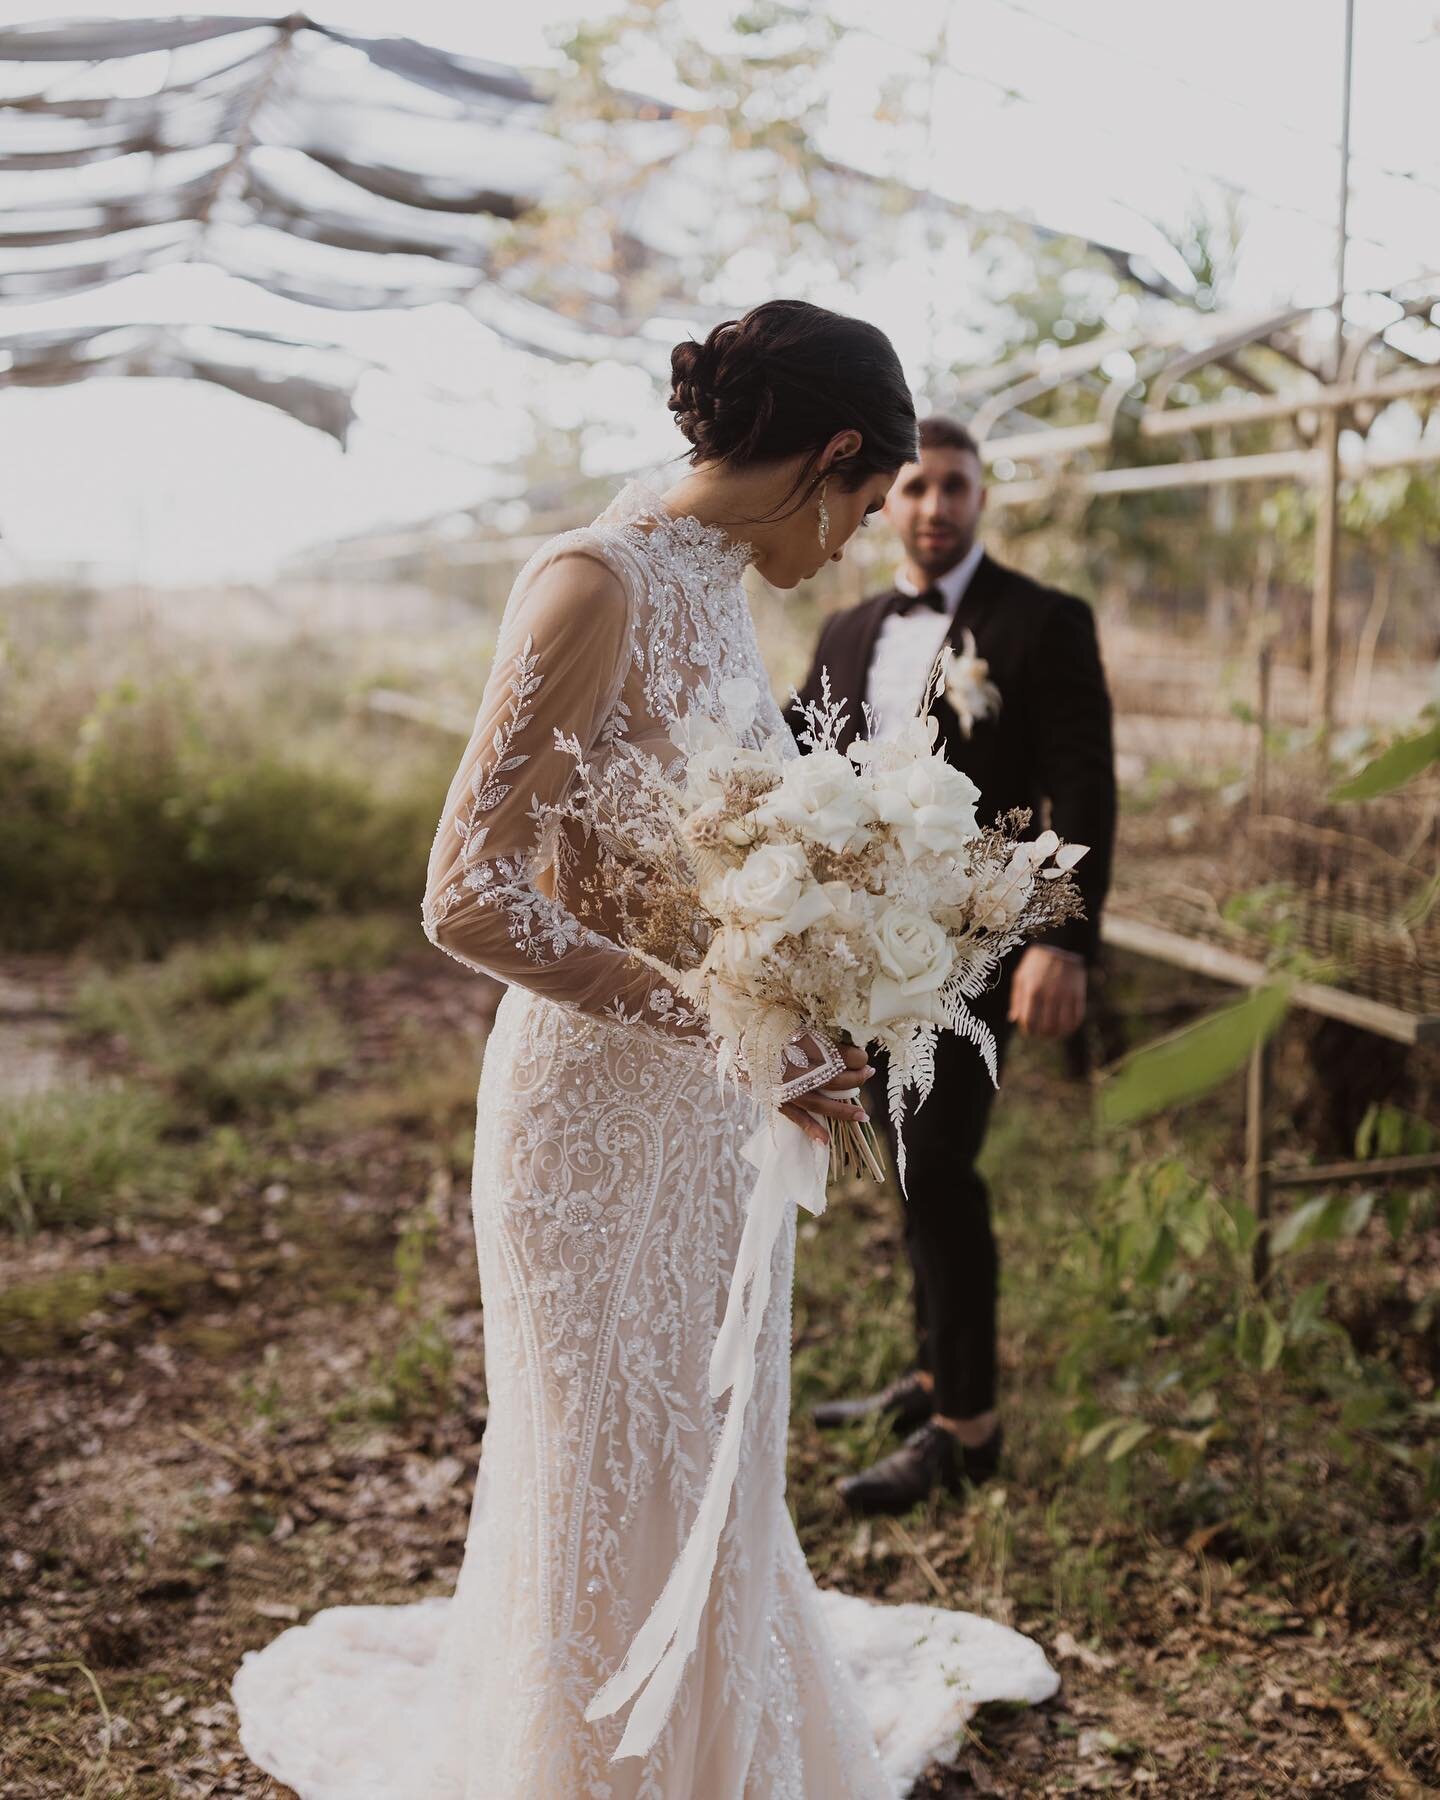 MIA + JIMMY

photography and planning: @theseitterwoodhouse
styling and planning: @desertrose.styling
videography: @vstar.productions @fvmedia.co
wedding gown: @eternalbridal @galialahav
hair: @pinned_hair
makeup: @alicemakeupartist
flowers: @caitiel